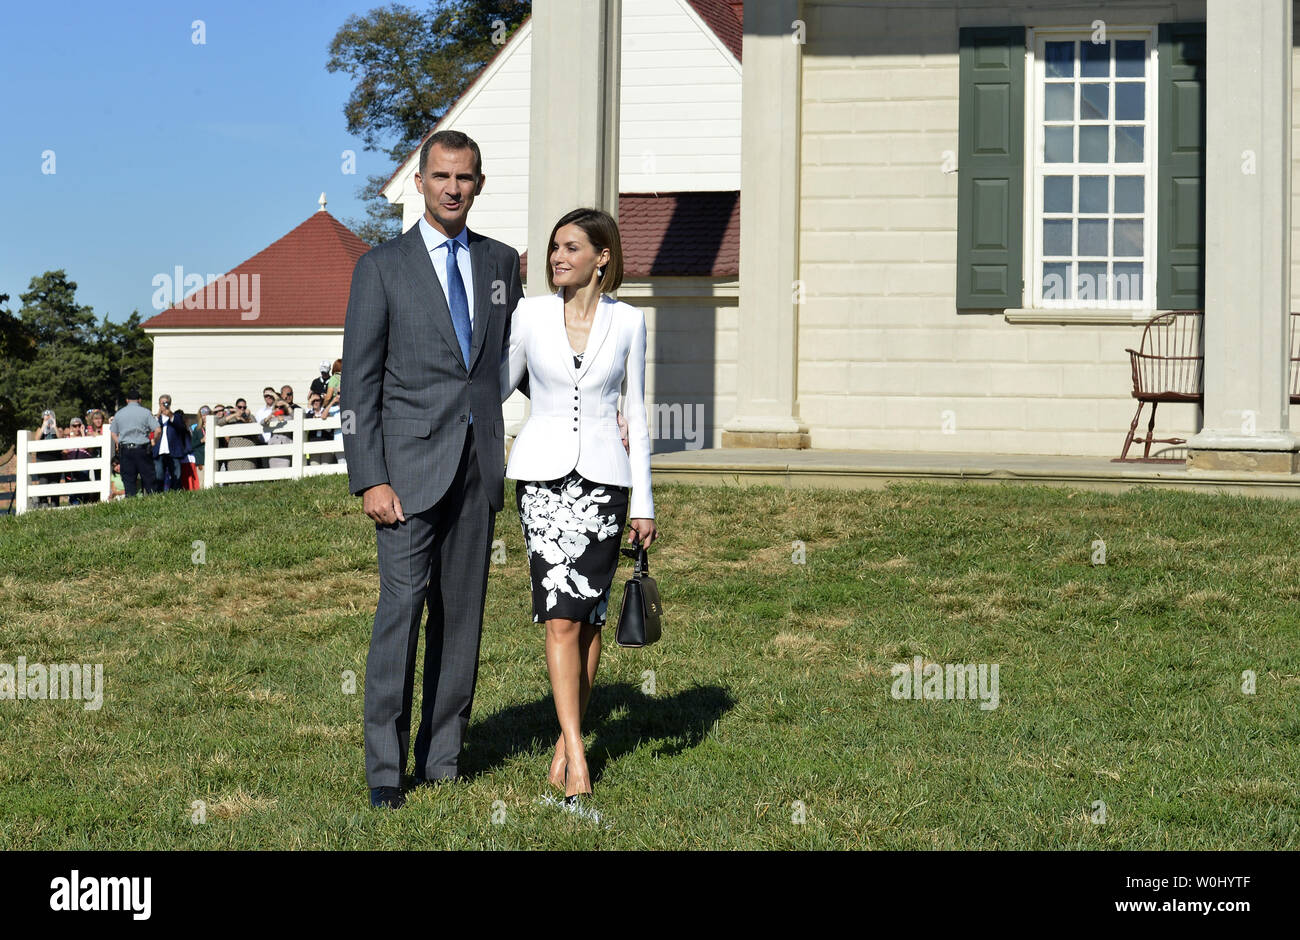 Spain's King Felipe VI (L) and Queen Letizia walk the grounds of America's first President George Washington, September 15, 2015, at Mount Vernon, Virginia. The Royals visit was to emphasize the long standing historic relations between Spain and the United States.     Photo by Mike Theiler/UPI Stock Photo